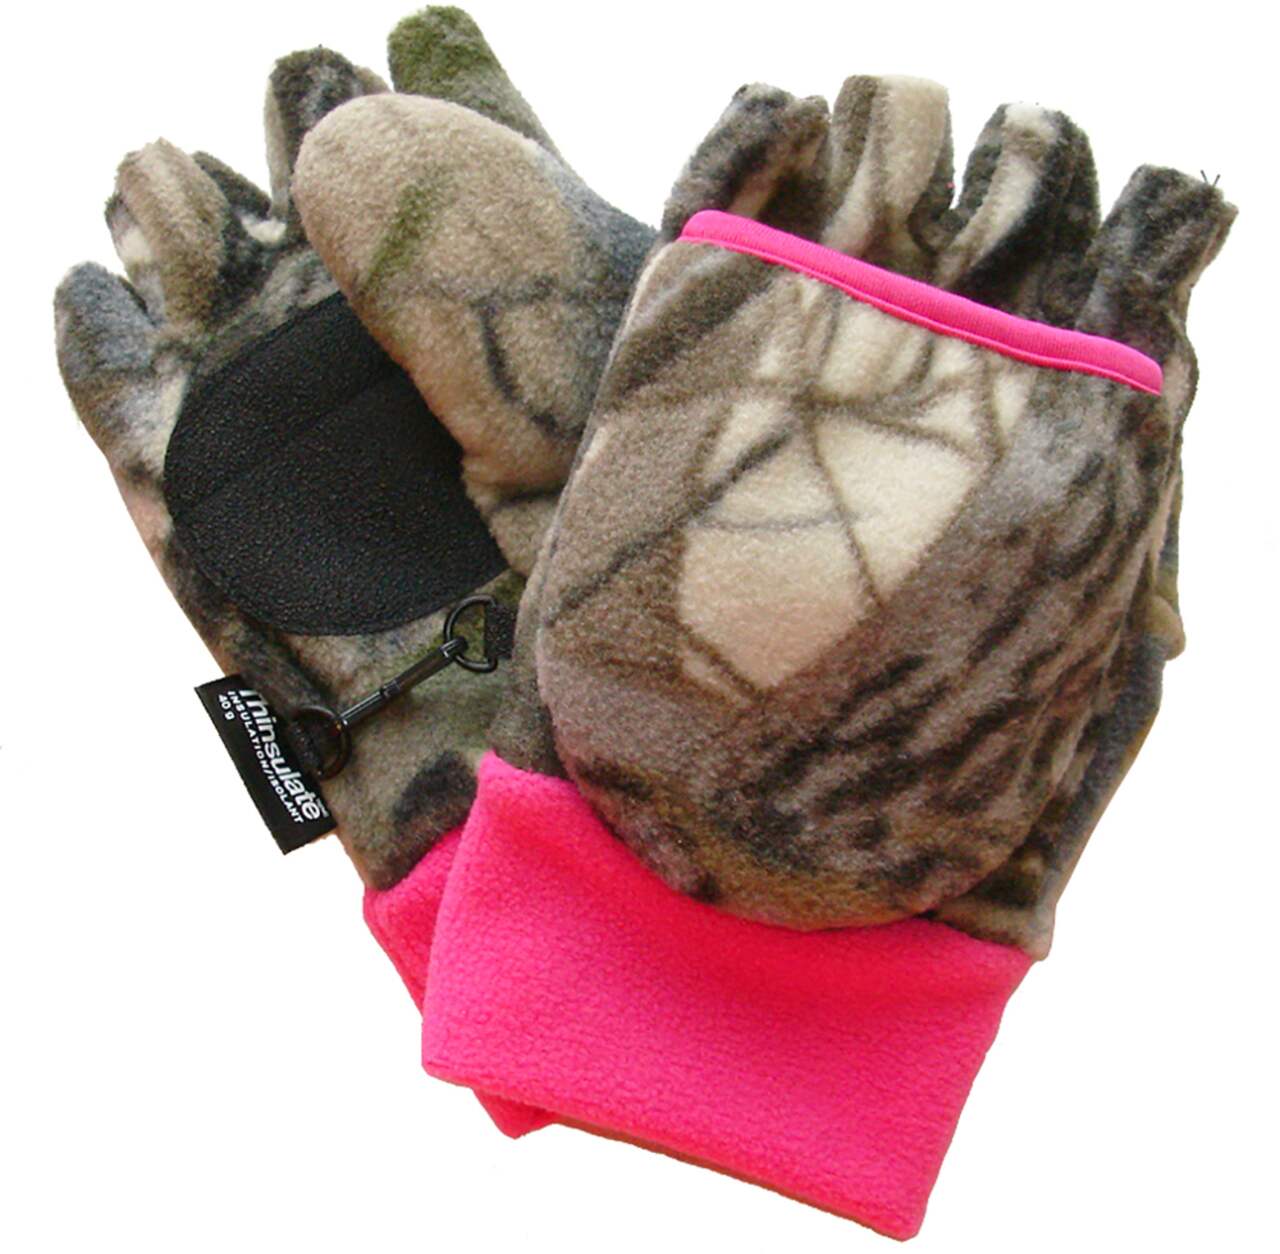 https://media-www.canadiantire.ca/product/playing/hunting/hunting-apparel-footwear/1758644/women-flip-mitts-s-m-02544c59-0e2d-423f-98a1-3ffcb0805024.png?imdensity=1&imwidth=640&impolicy=mZoom